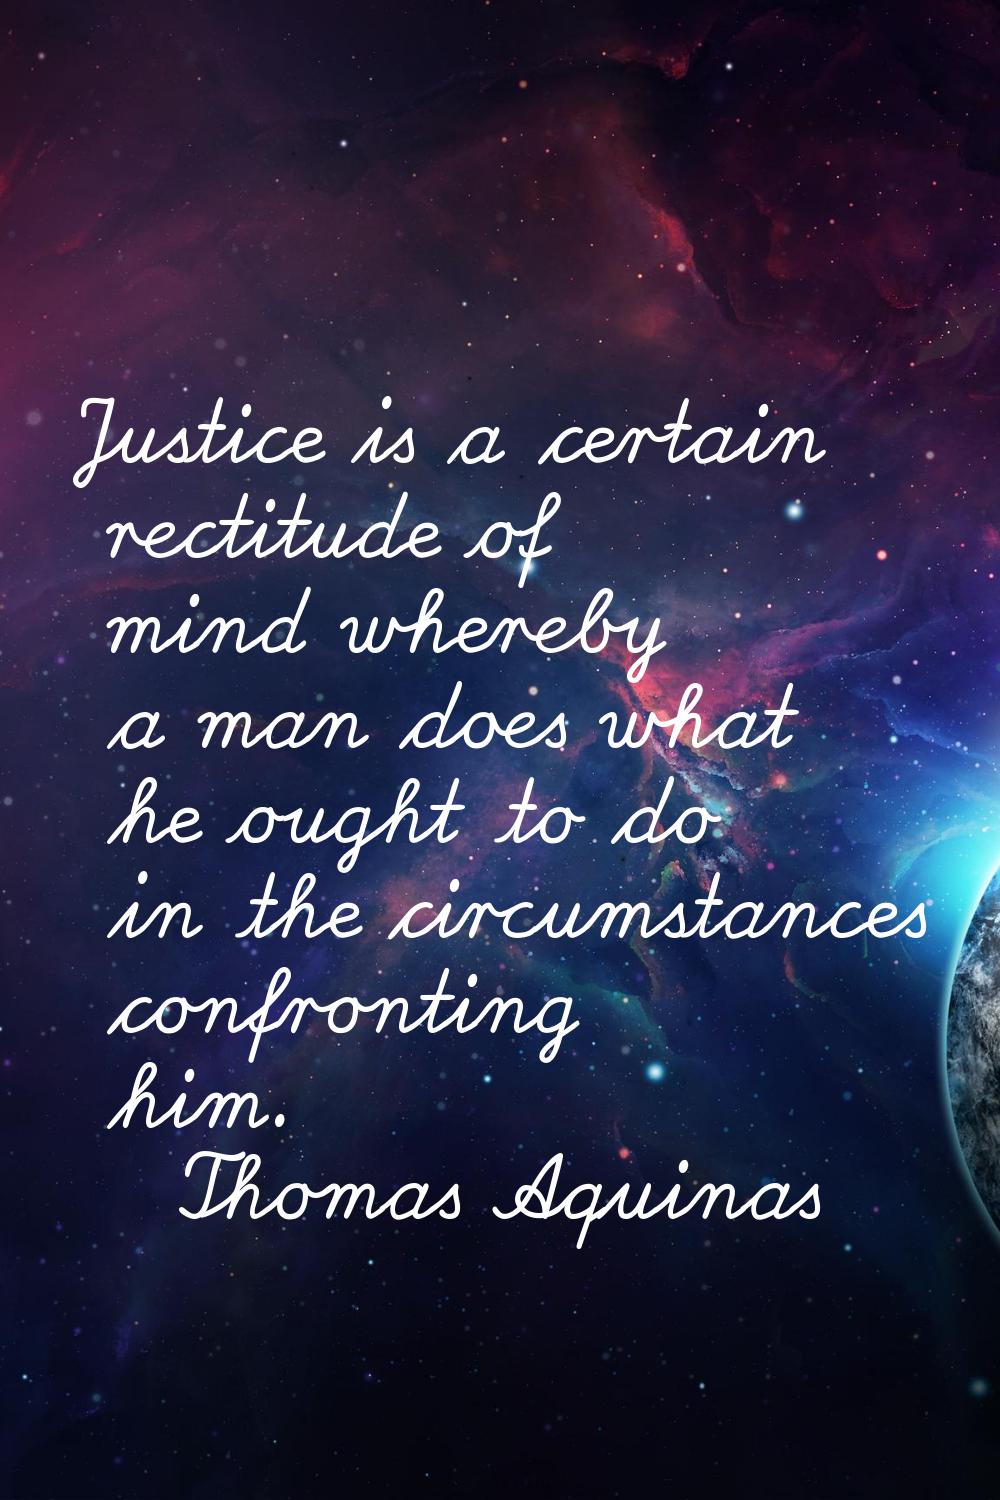 Justice is a certain rectitude of mind whereby a man does what he ought to do in the circumstances 